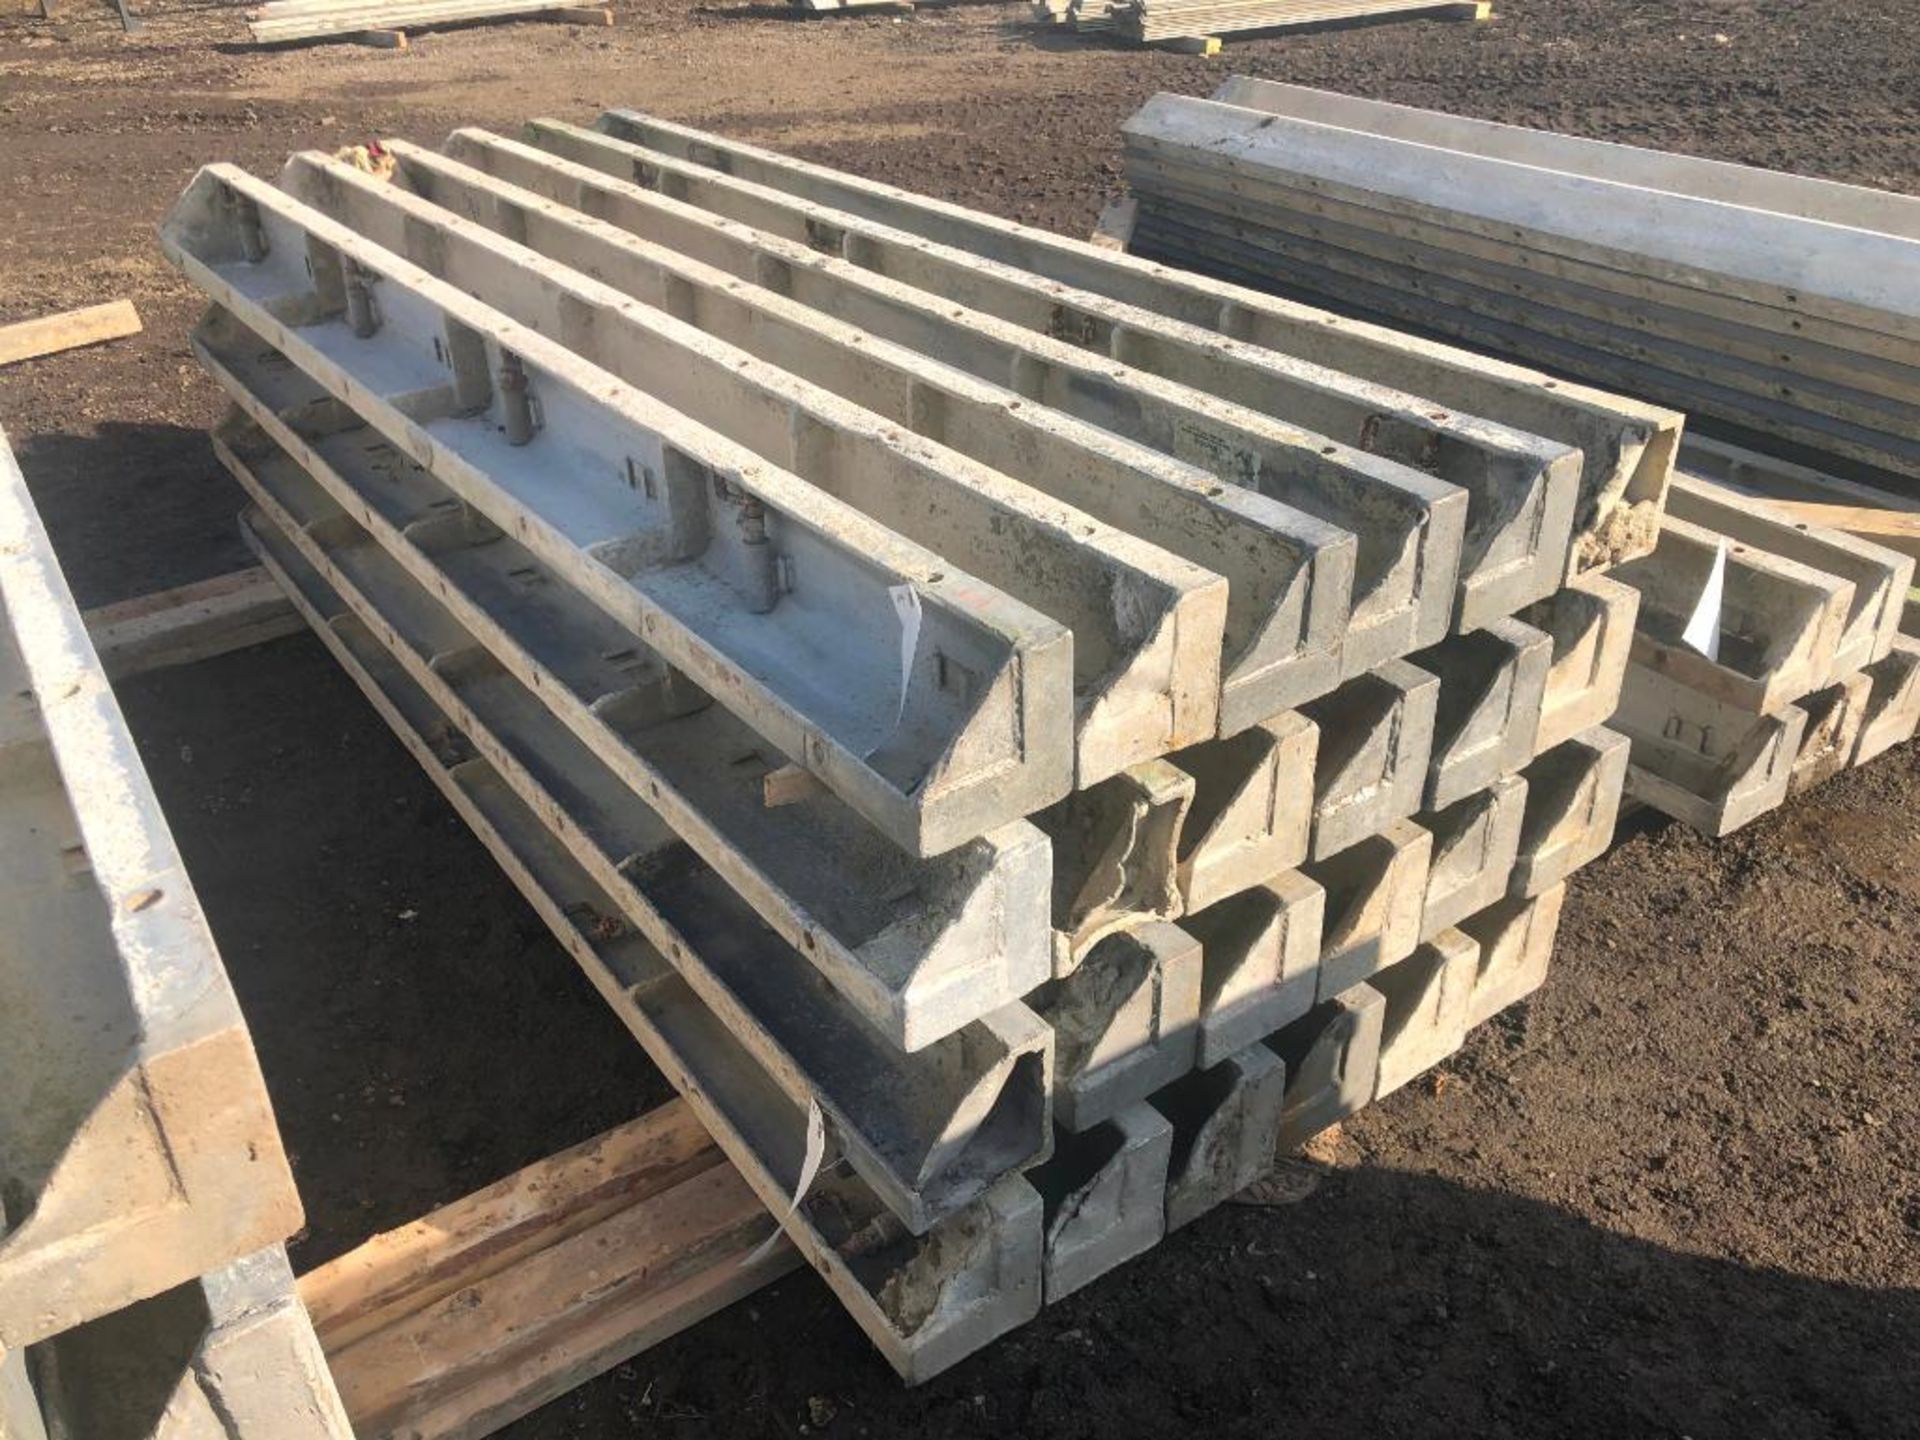 (12) 6" x 6" x 8' ISC Western Aluminum Concrete Forms, Smooth 6-12 Hole Pattern, Located in - Image 2 of 2